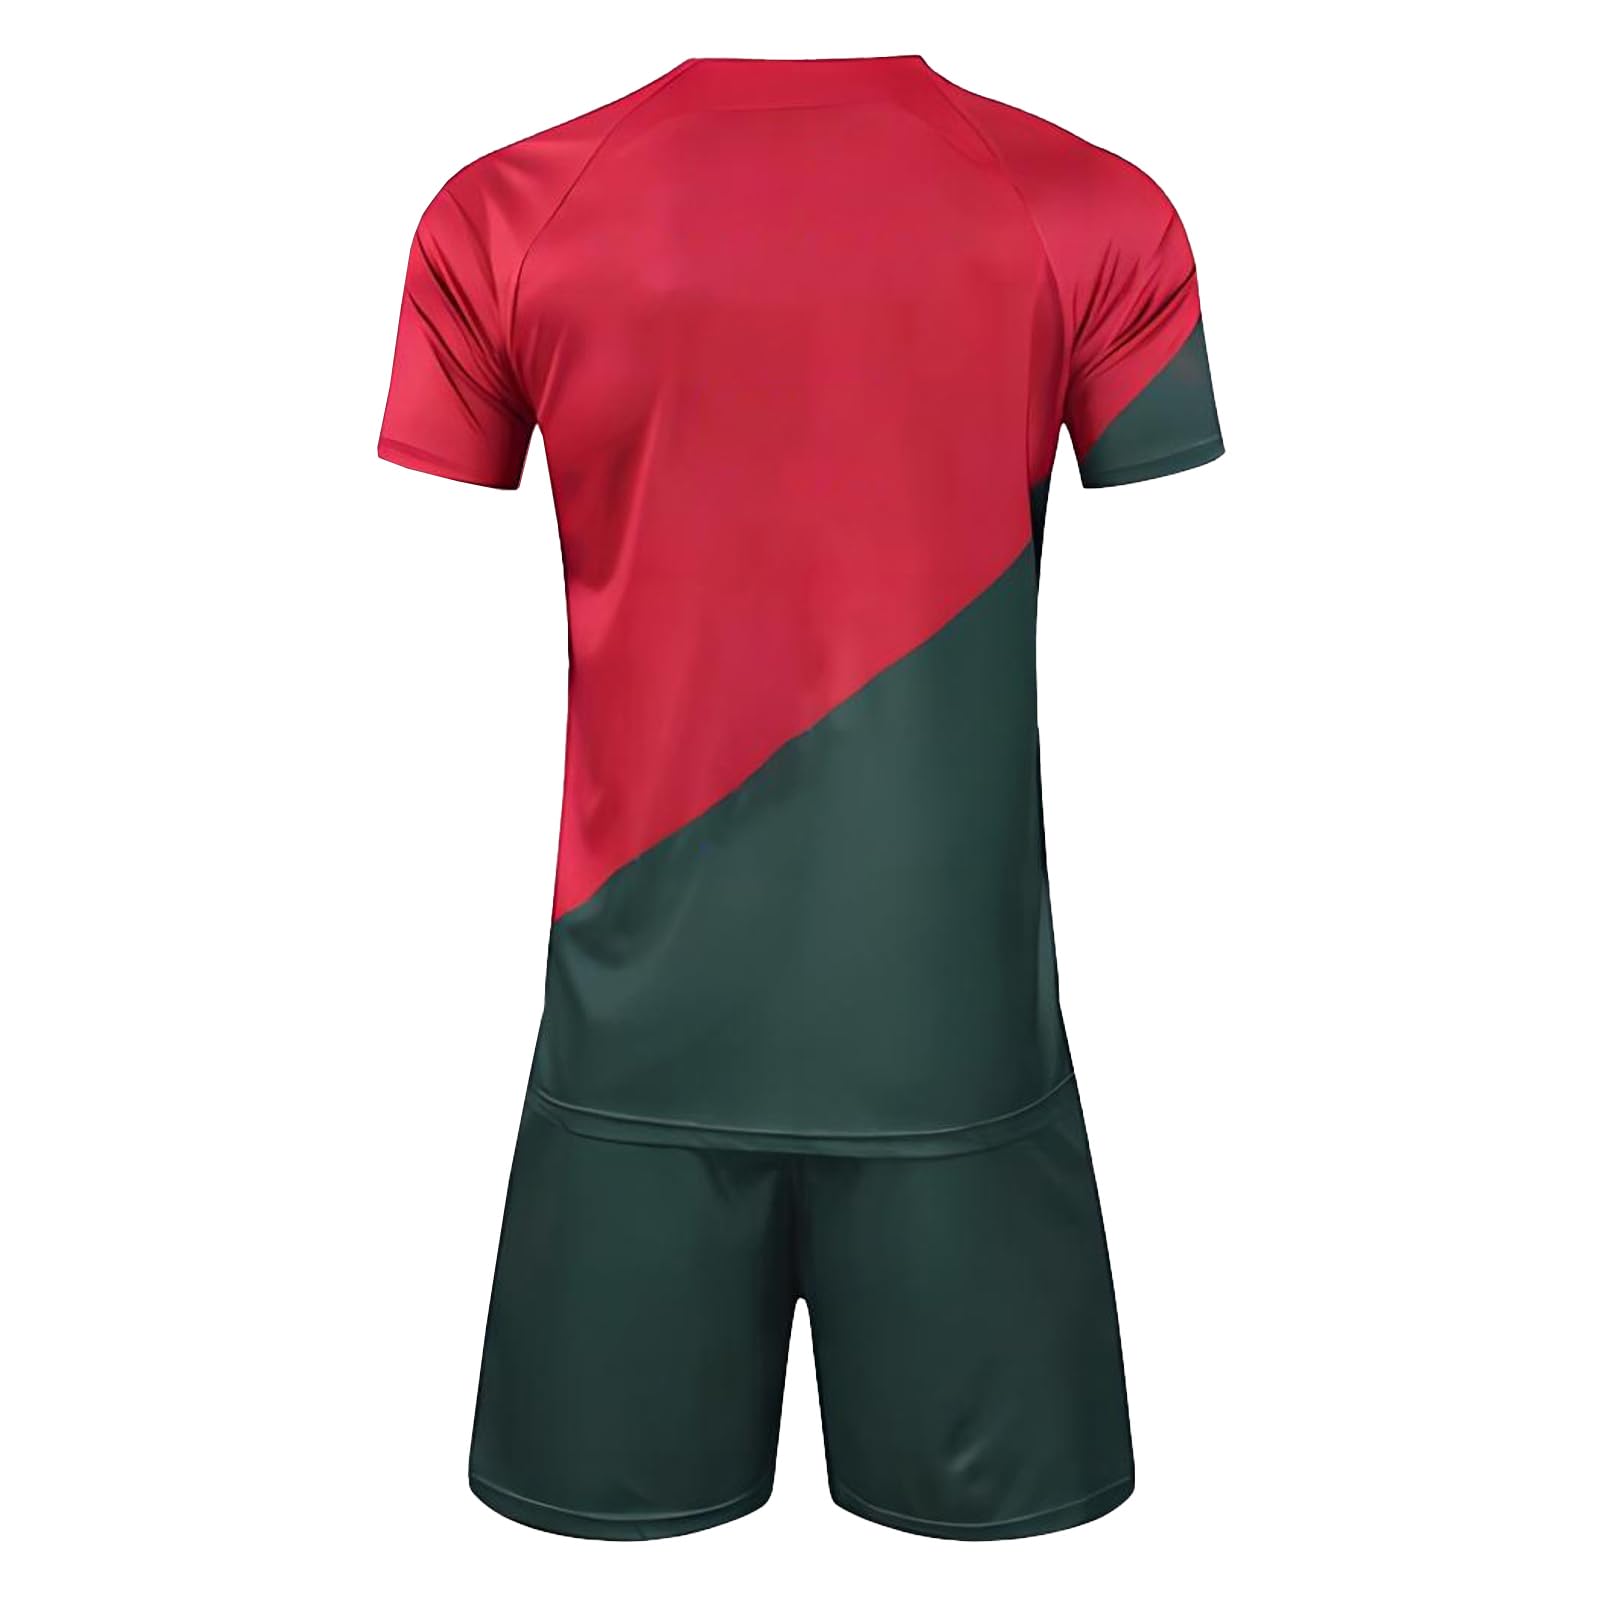 Custom Soccer Jerseys for Kids Adults Personalized 2022 Cup Team Uniform with Name Number Shorts Set Gifts Camiseta de Futbol Portugal-A Medium